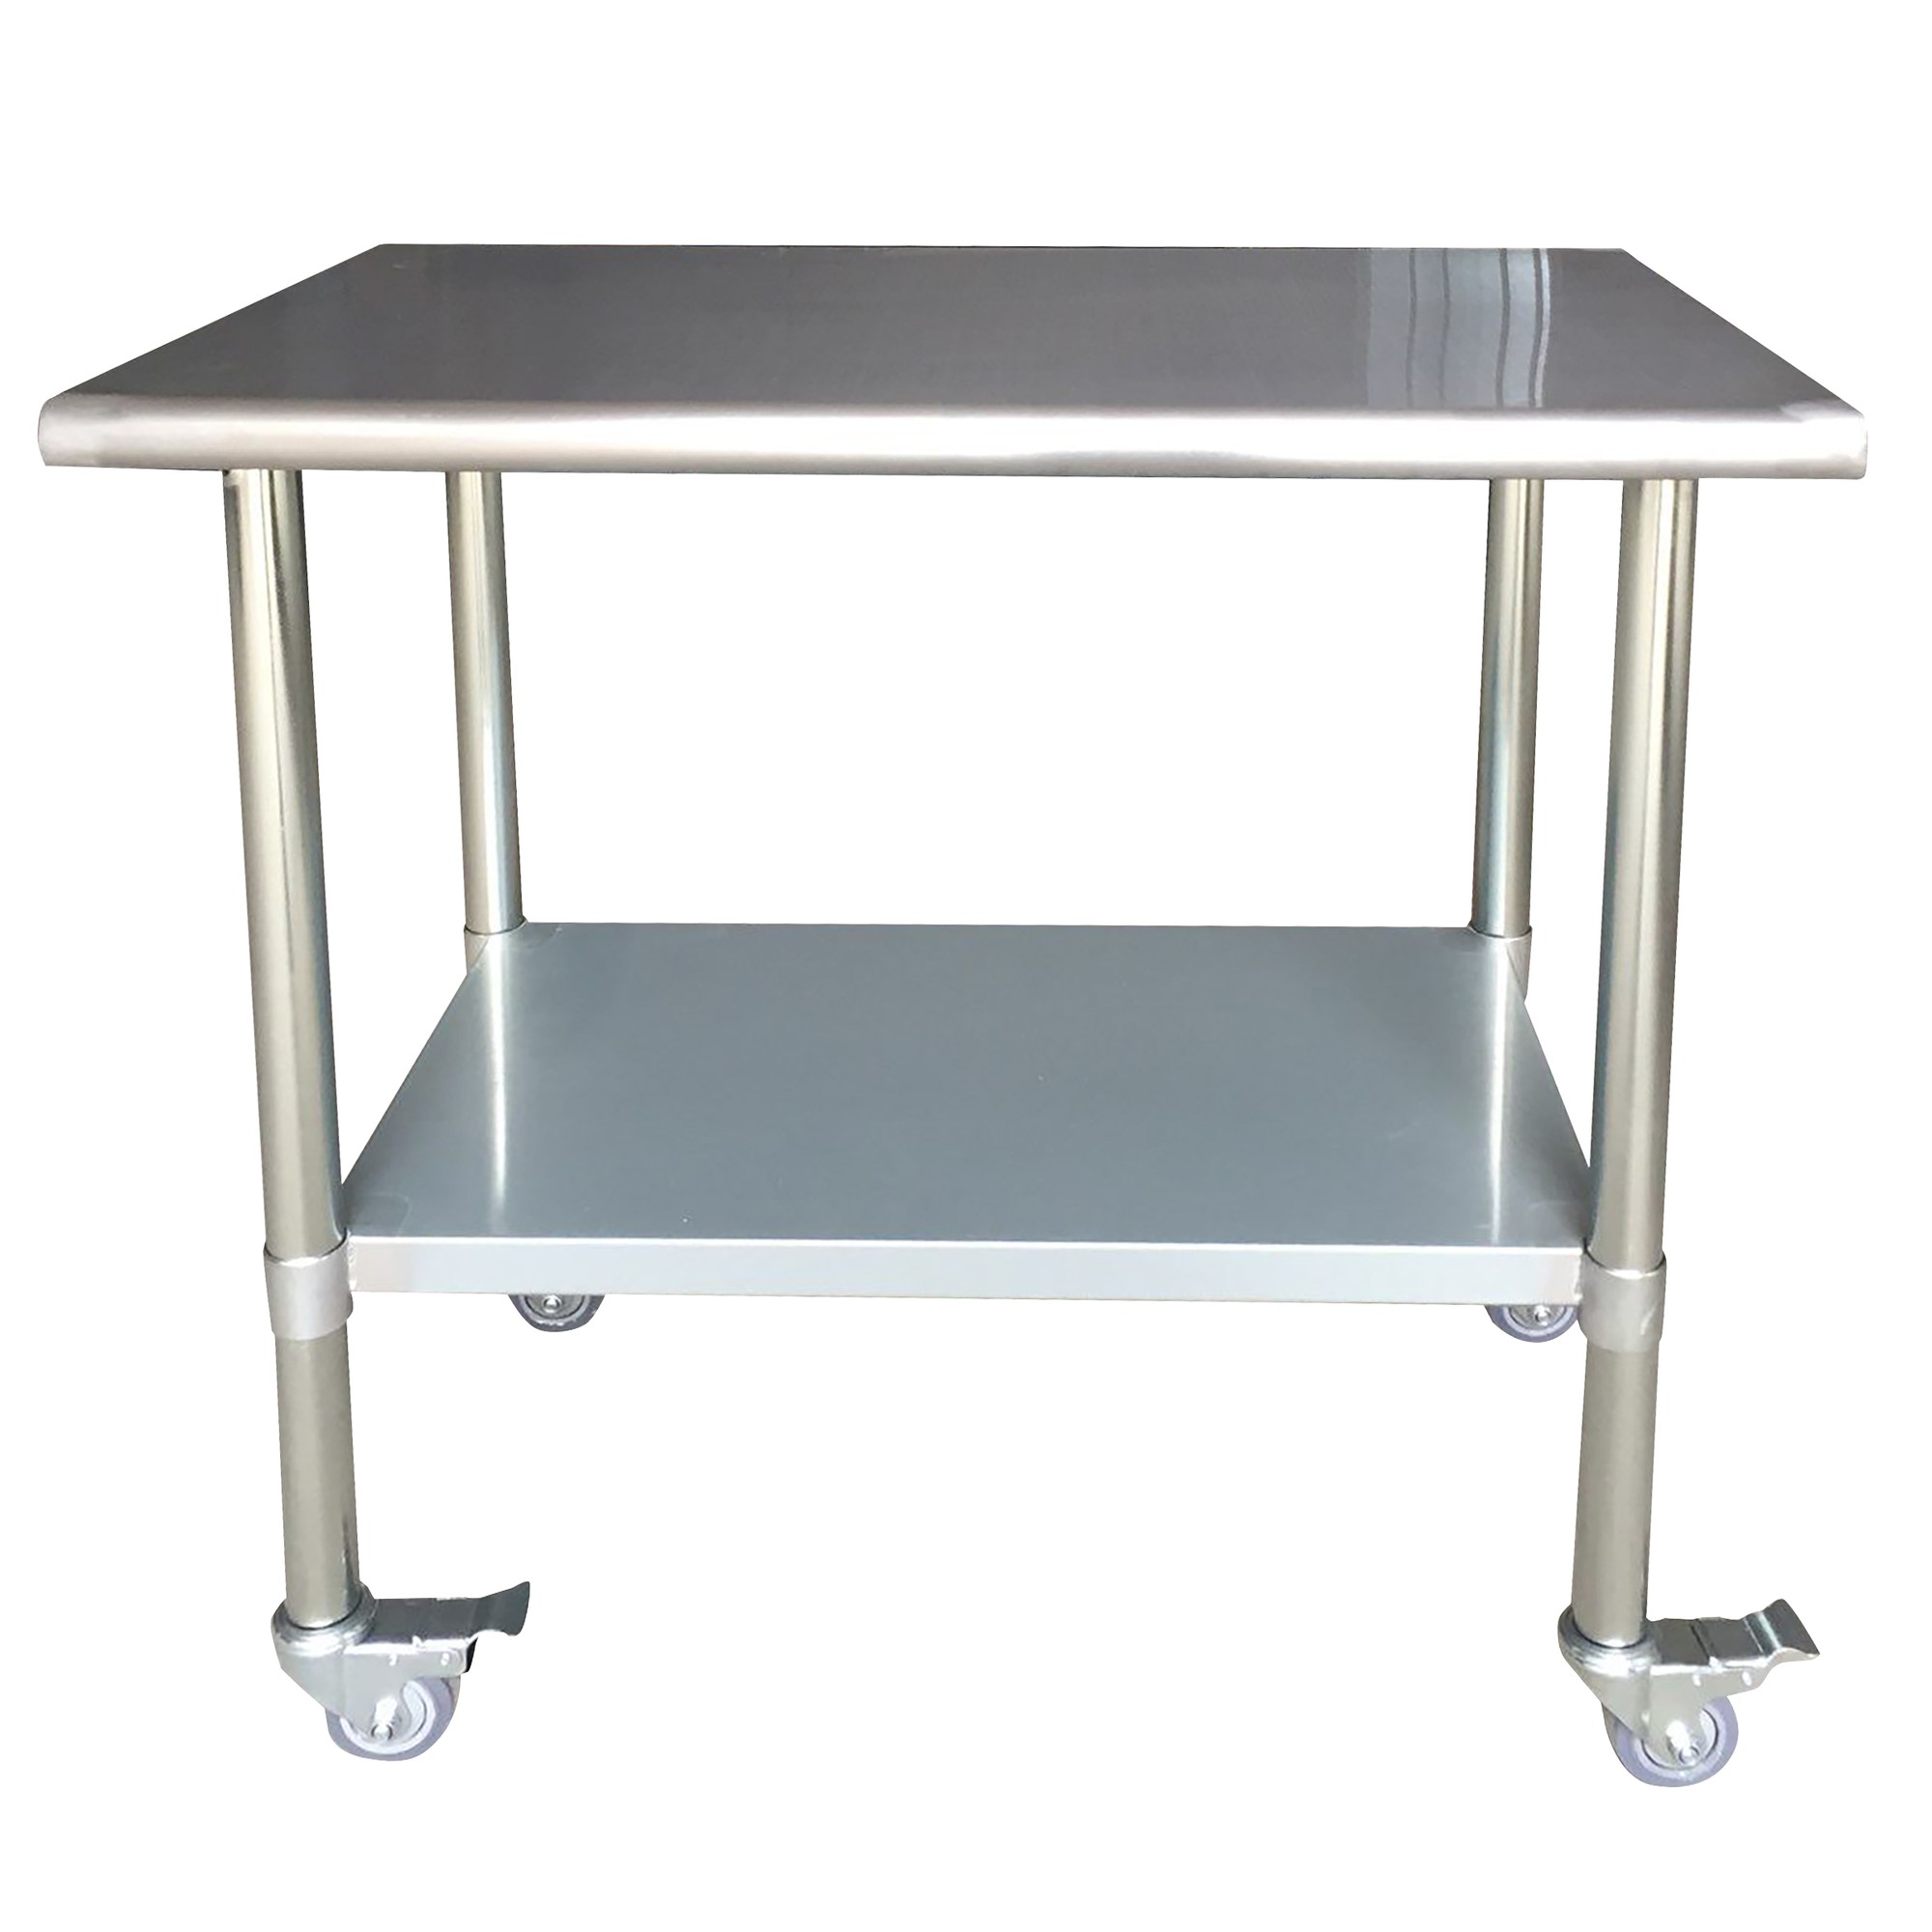 Stainless Steel Work Table with Casters 24 x 36 Inches